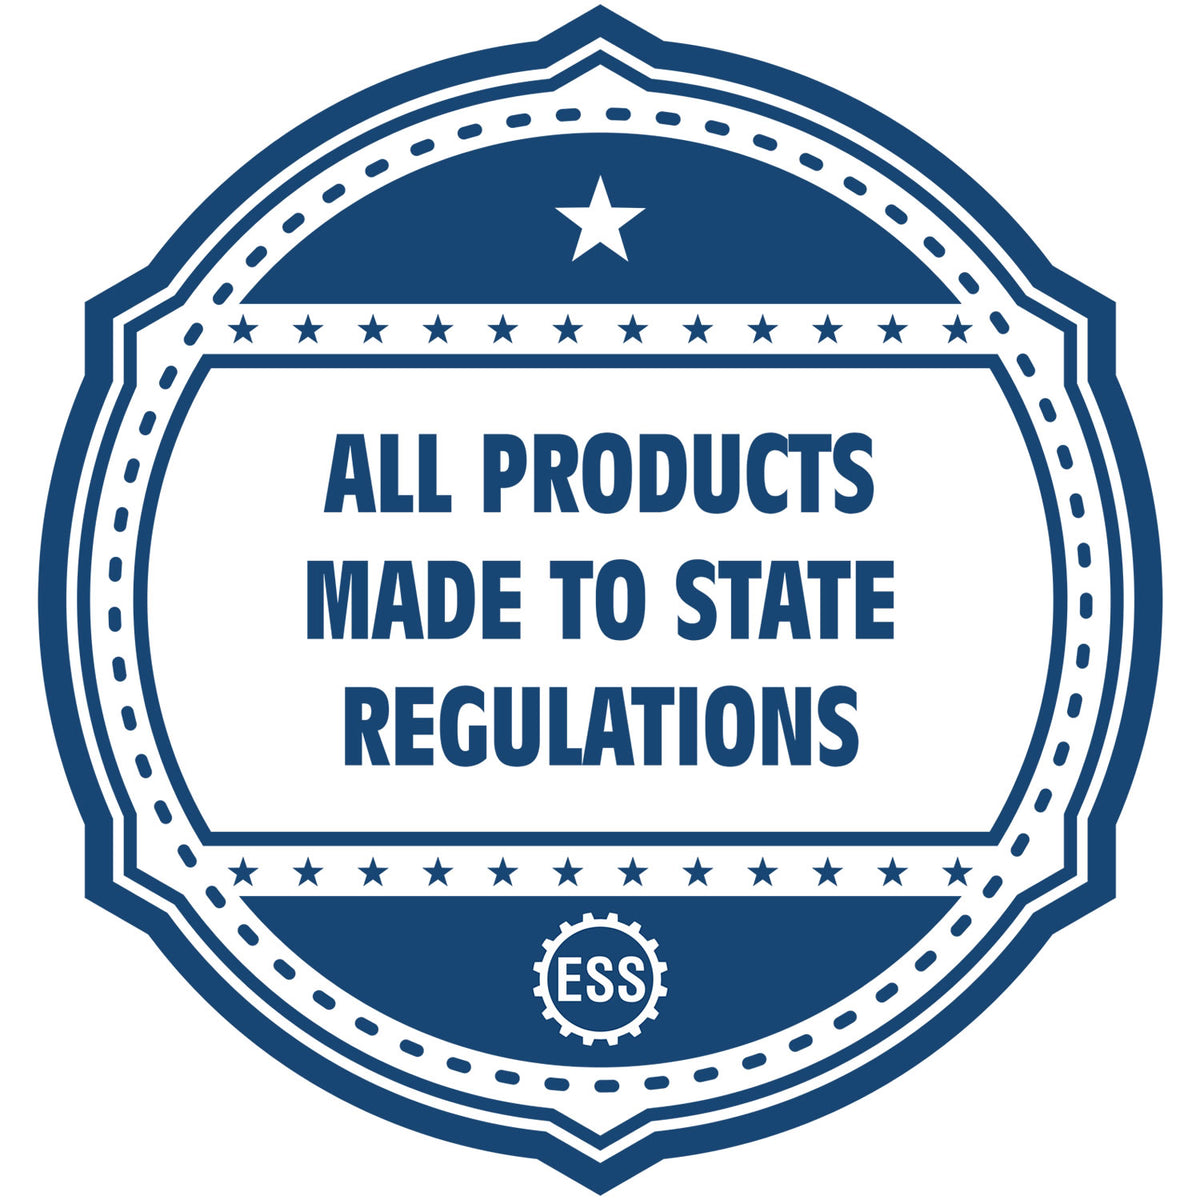 An icon or badge element for the Digital Washington Landscape Architect Stamp showing that this product is made in compliance with state regulations.